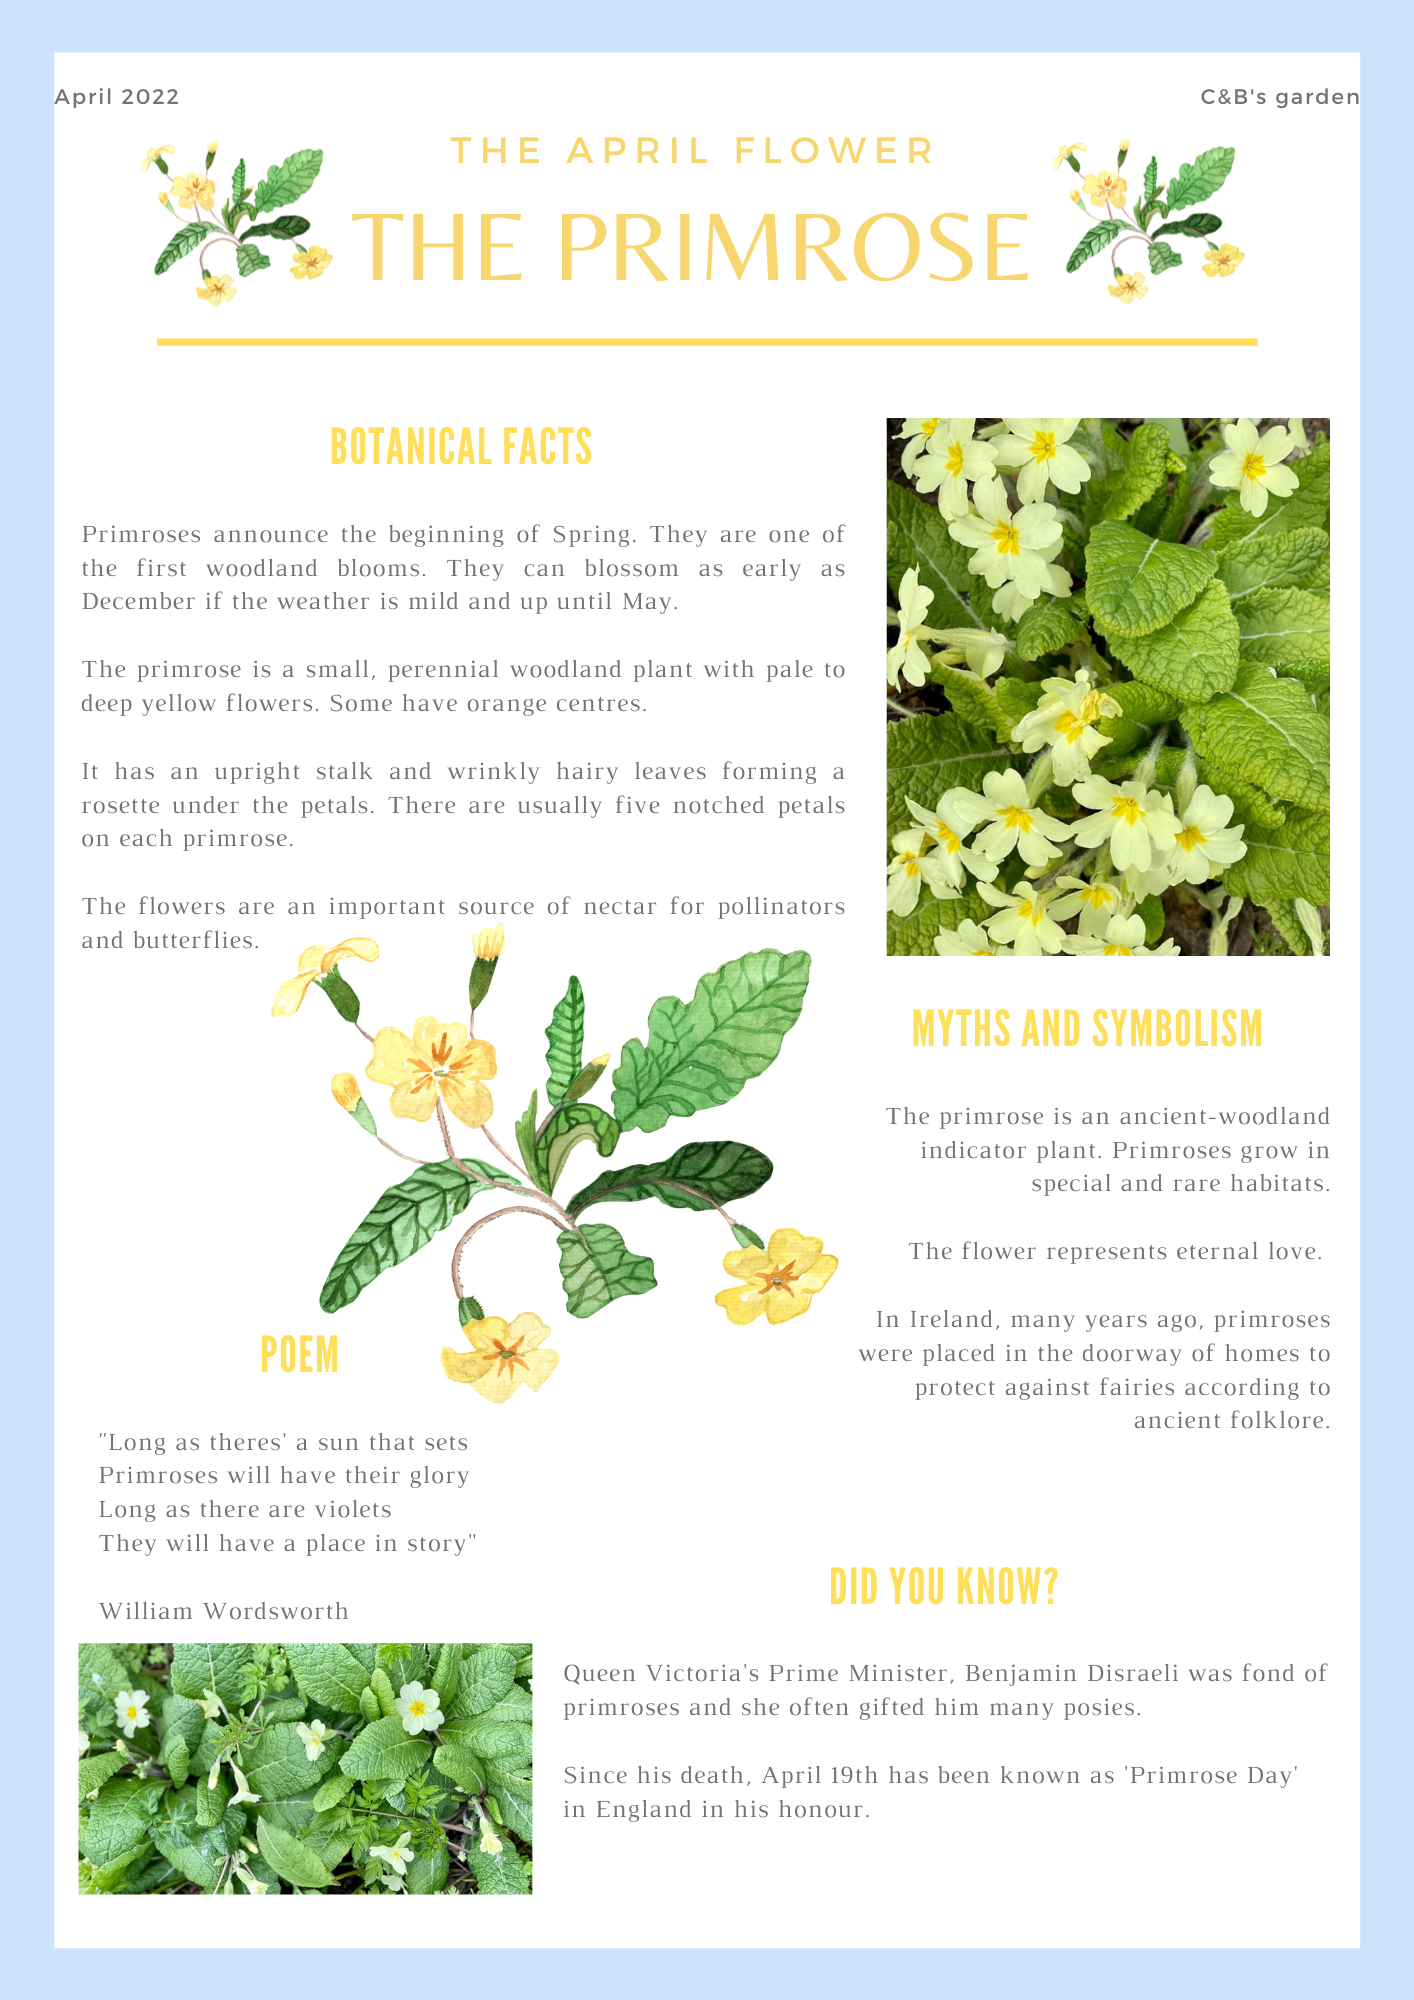 Fun facts about flowers for children - Learn all about the primrose - Charlotte and Burlington family club